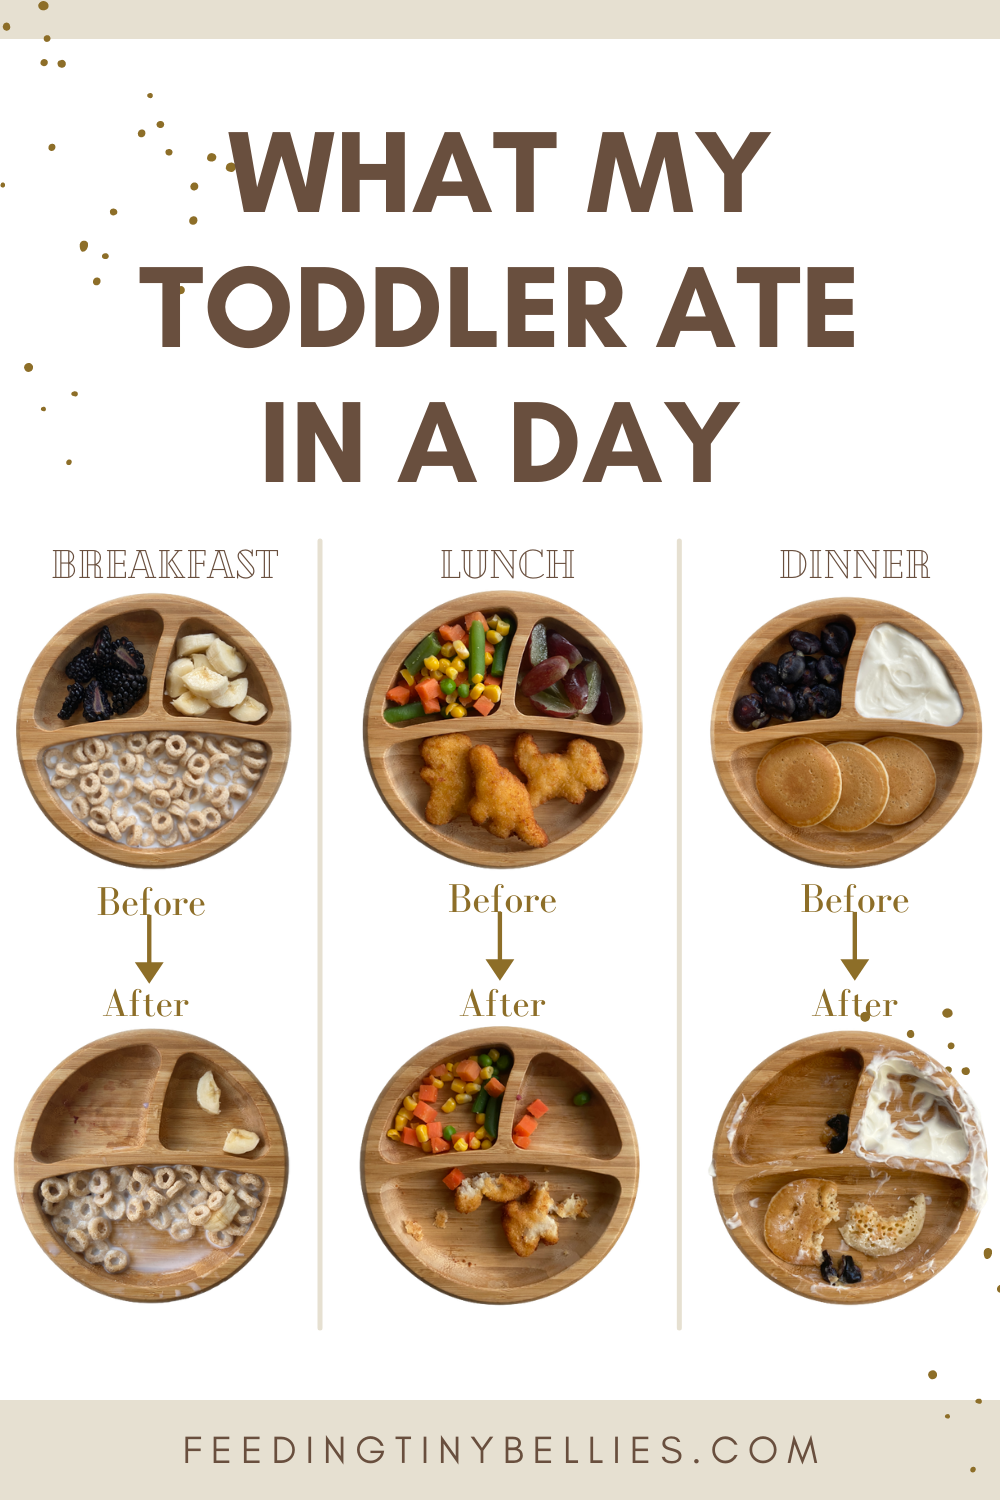 What my toddler ate in a day - meals offered for breakfast, lunch, and dinner.